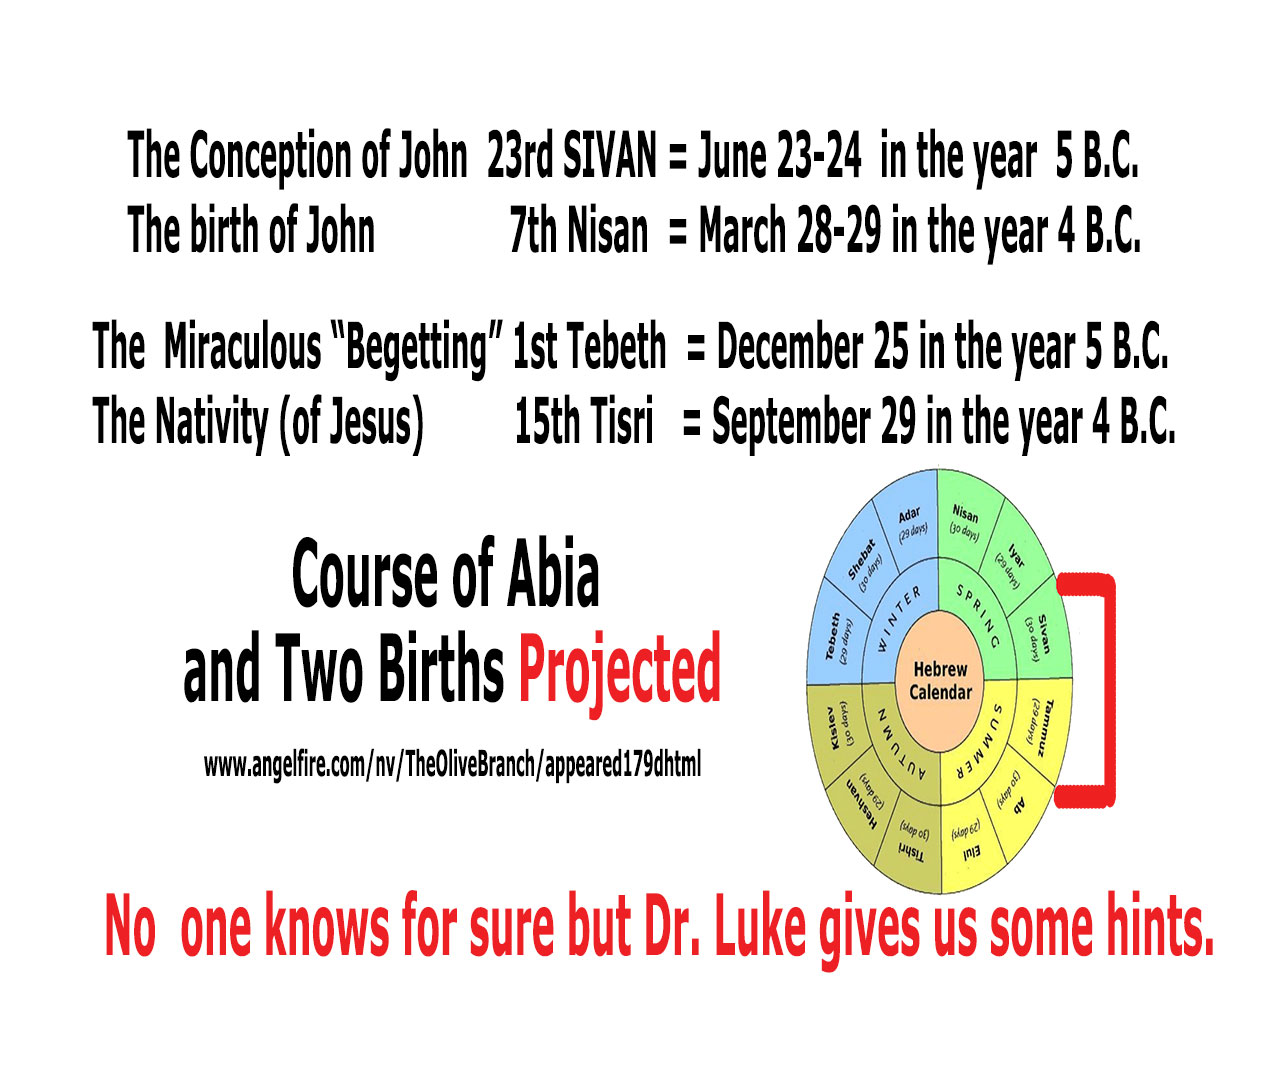 dates on conception and birth of John and Jesus projected with Hebrew calendar and Course of Abia